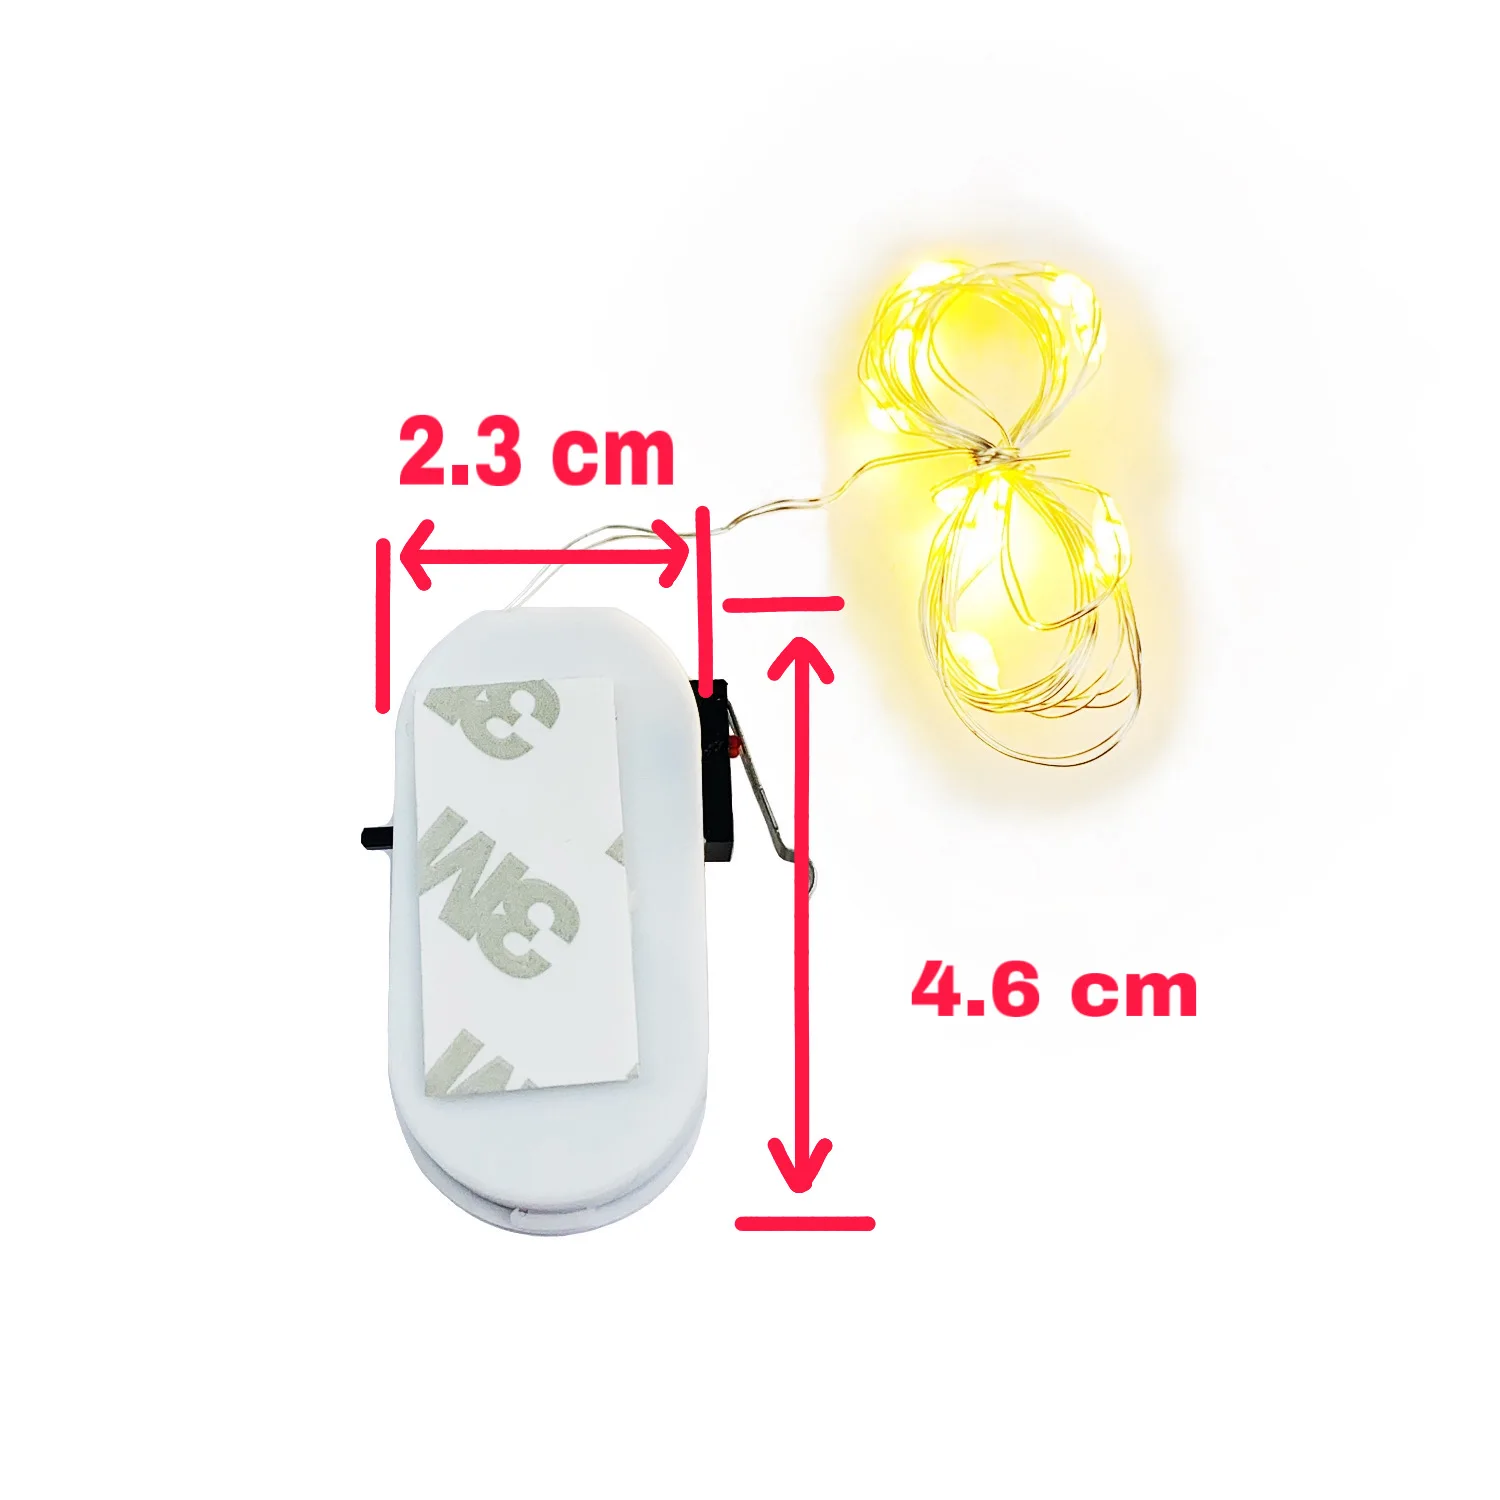 
led module Flashing Light Small Size Yellow String Light Electronic Circuits Component Christmas Lights For Box Gift Decoration 